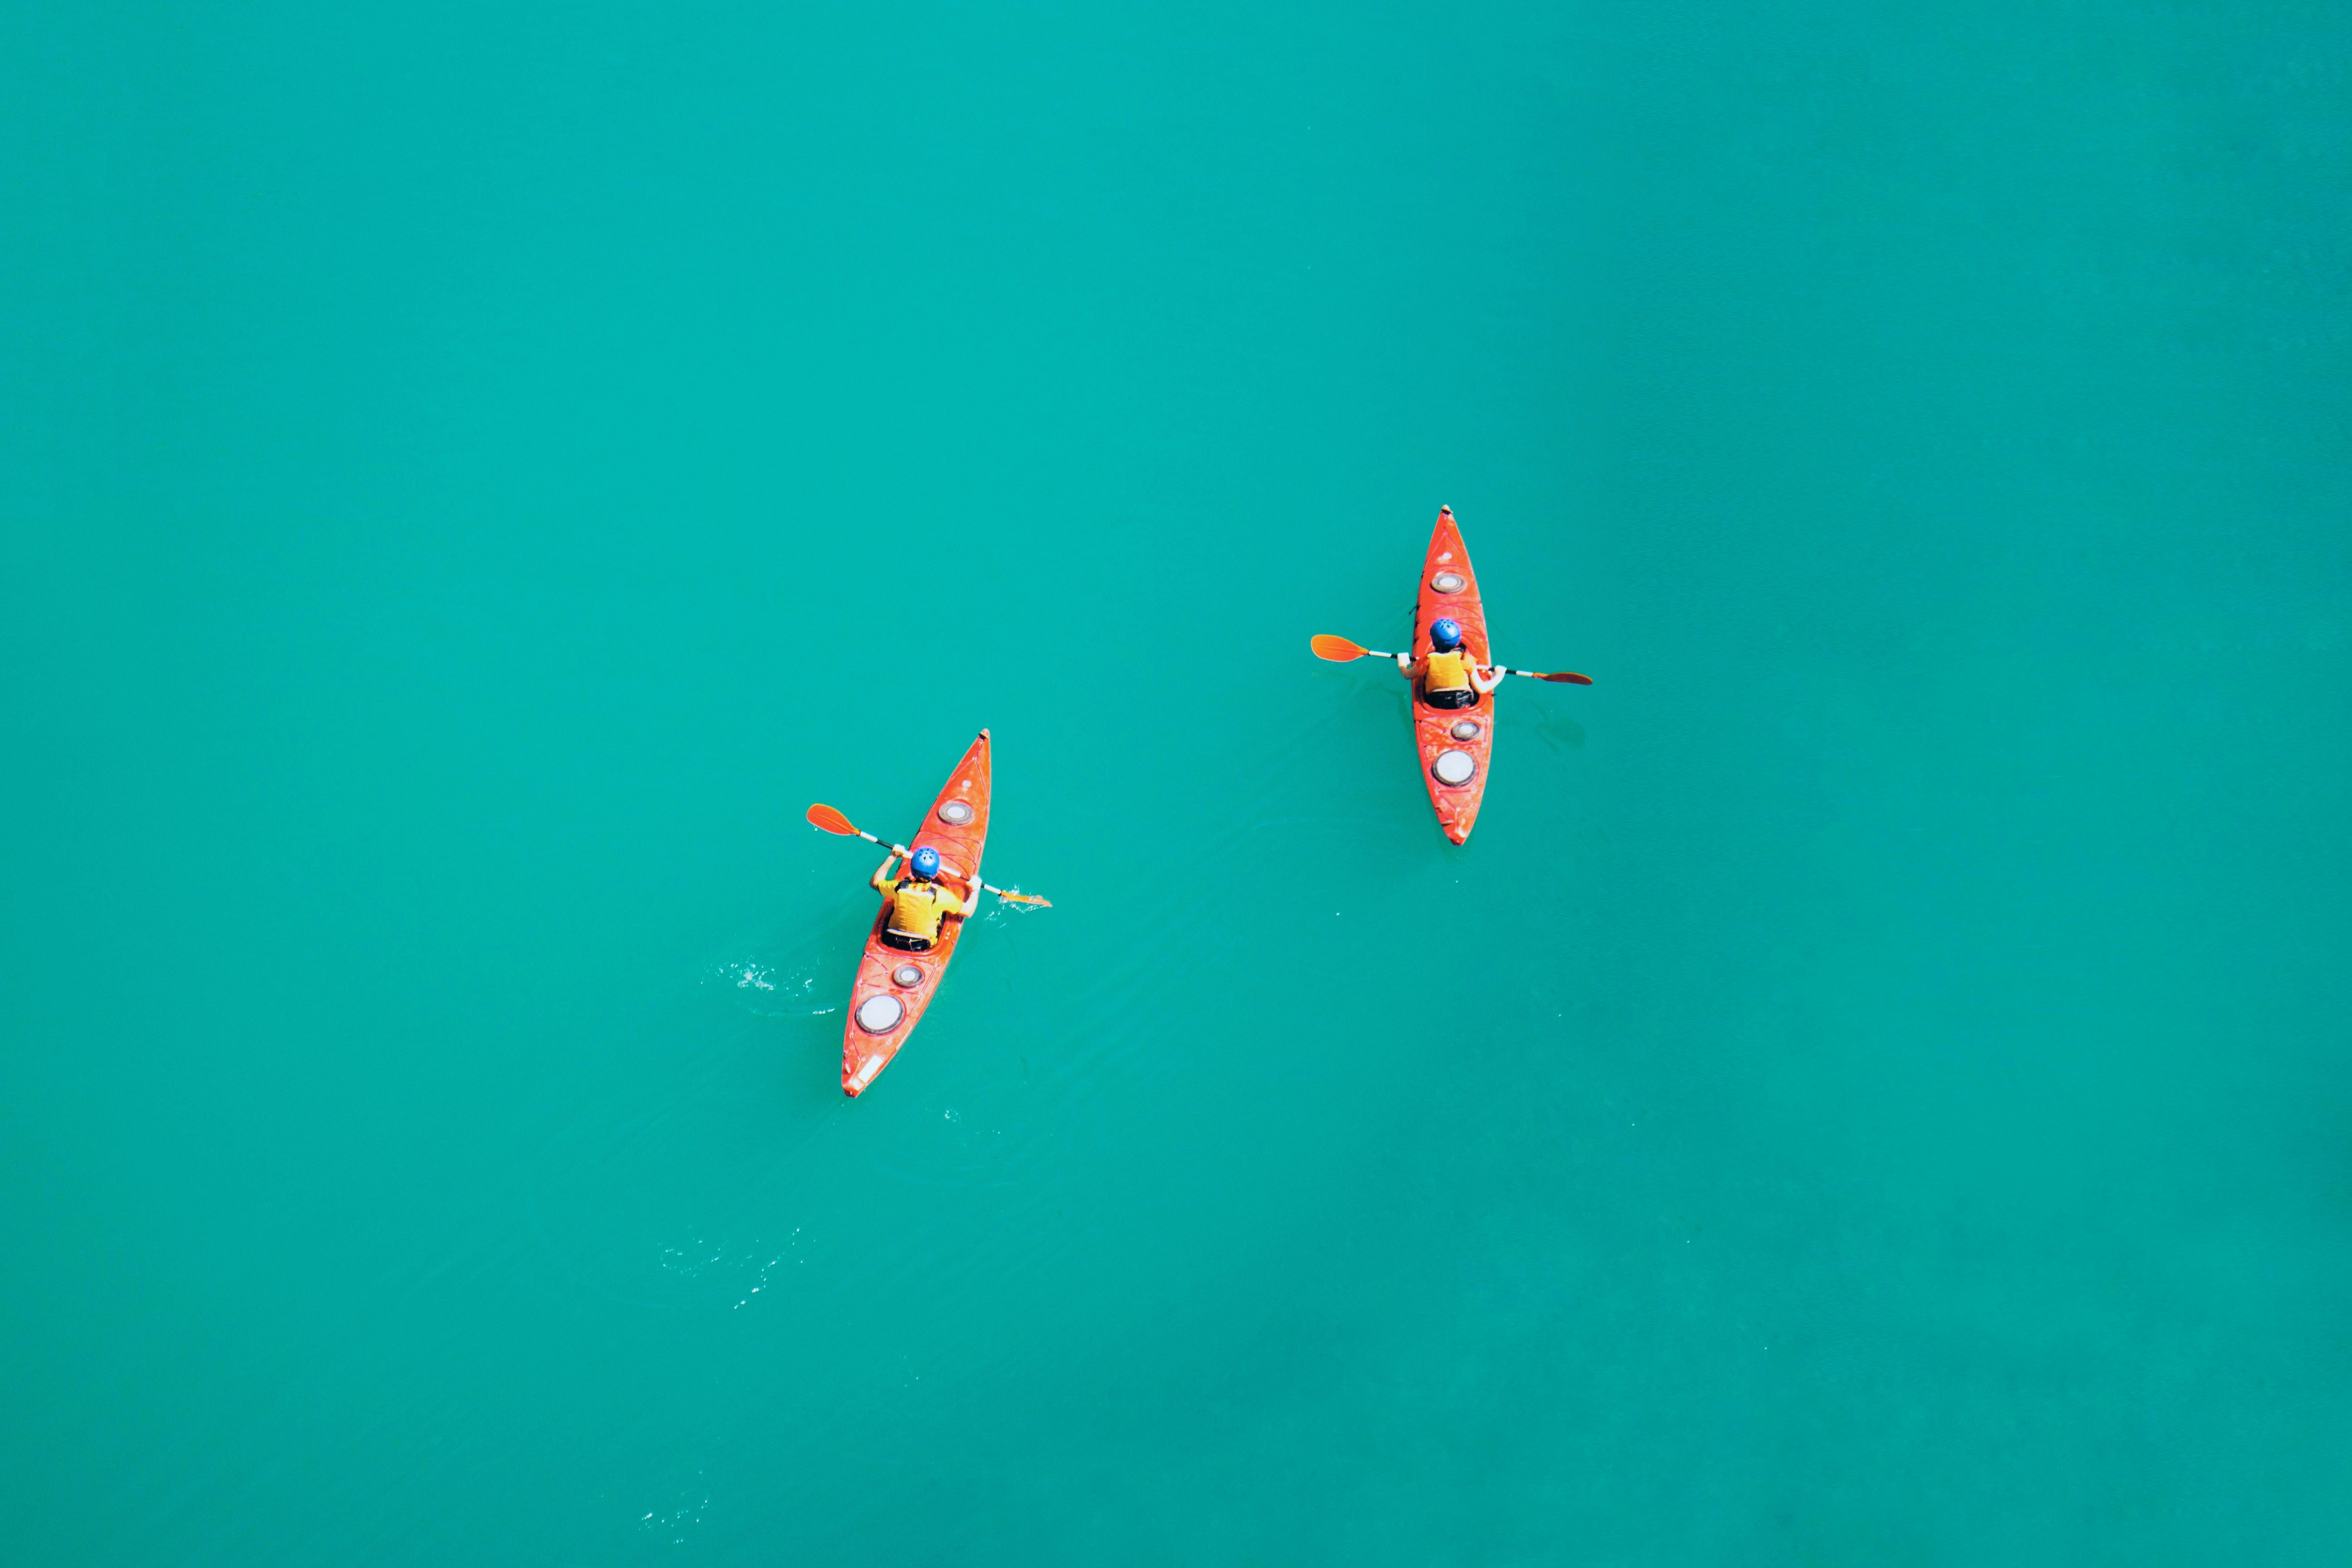 two person kayaking on open body of water